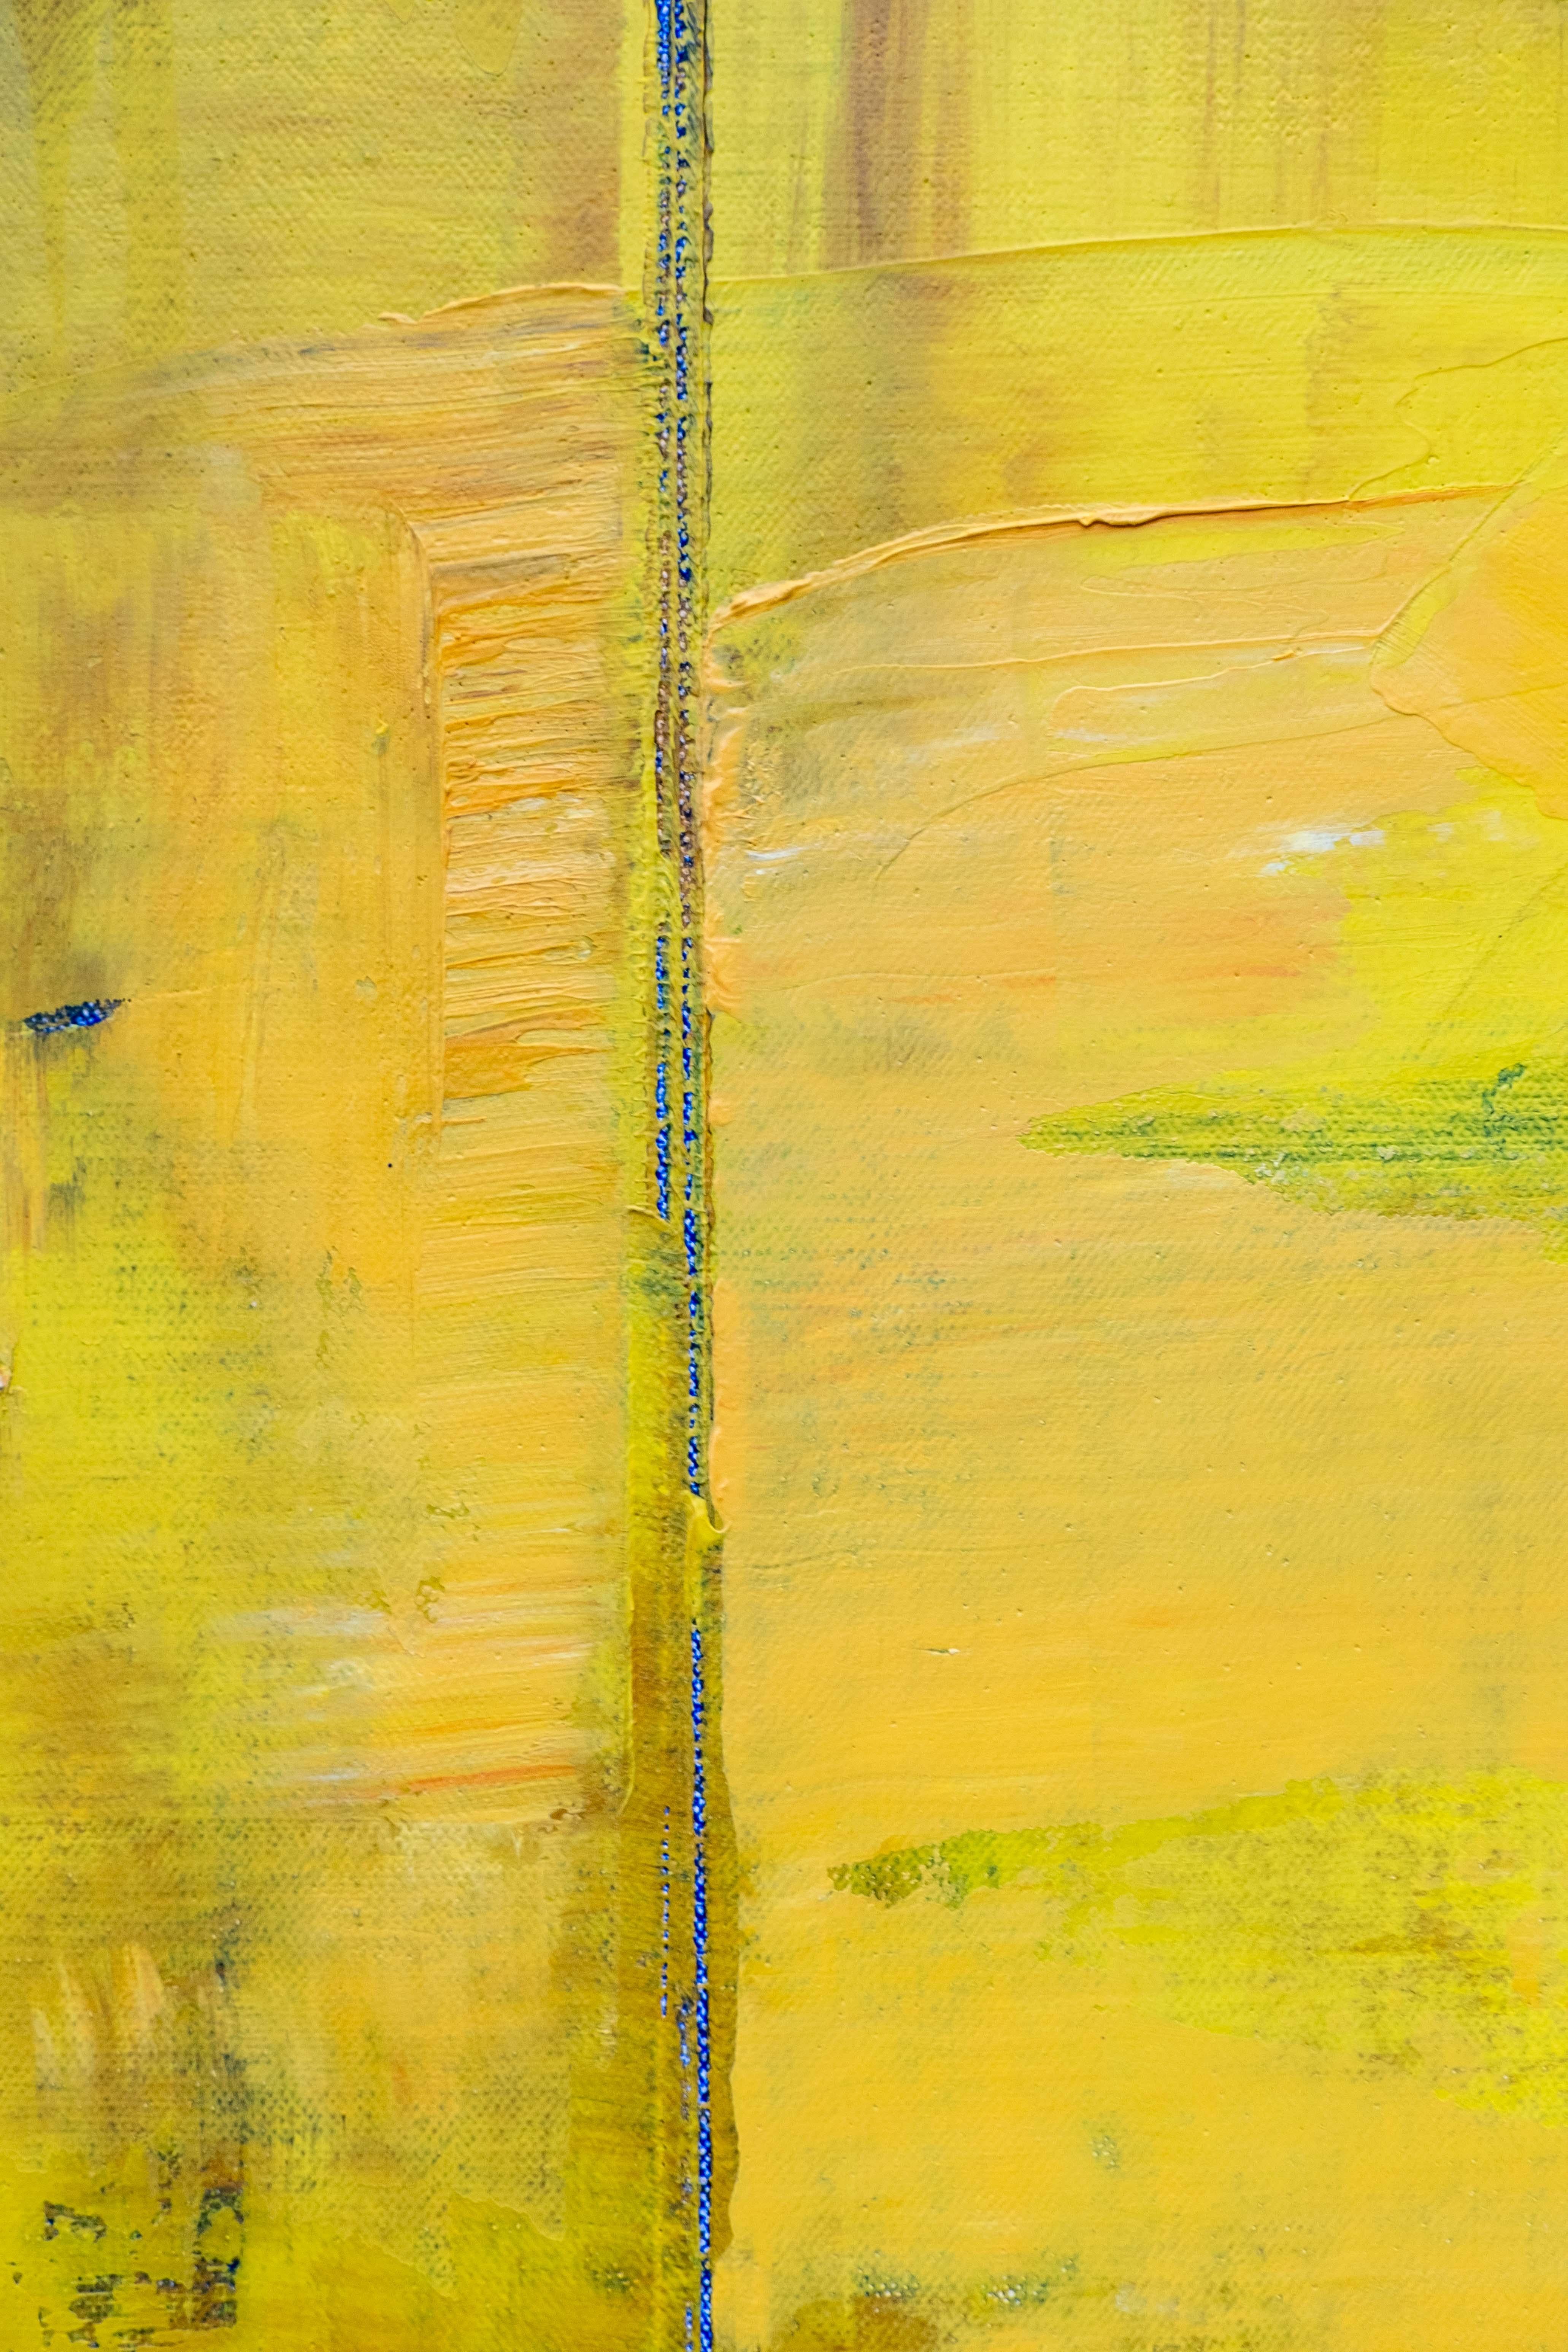 Amida - large, bright, colorful, yellow, abstract grid, modernist, oil on canvas 4